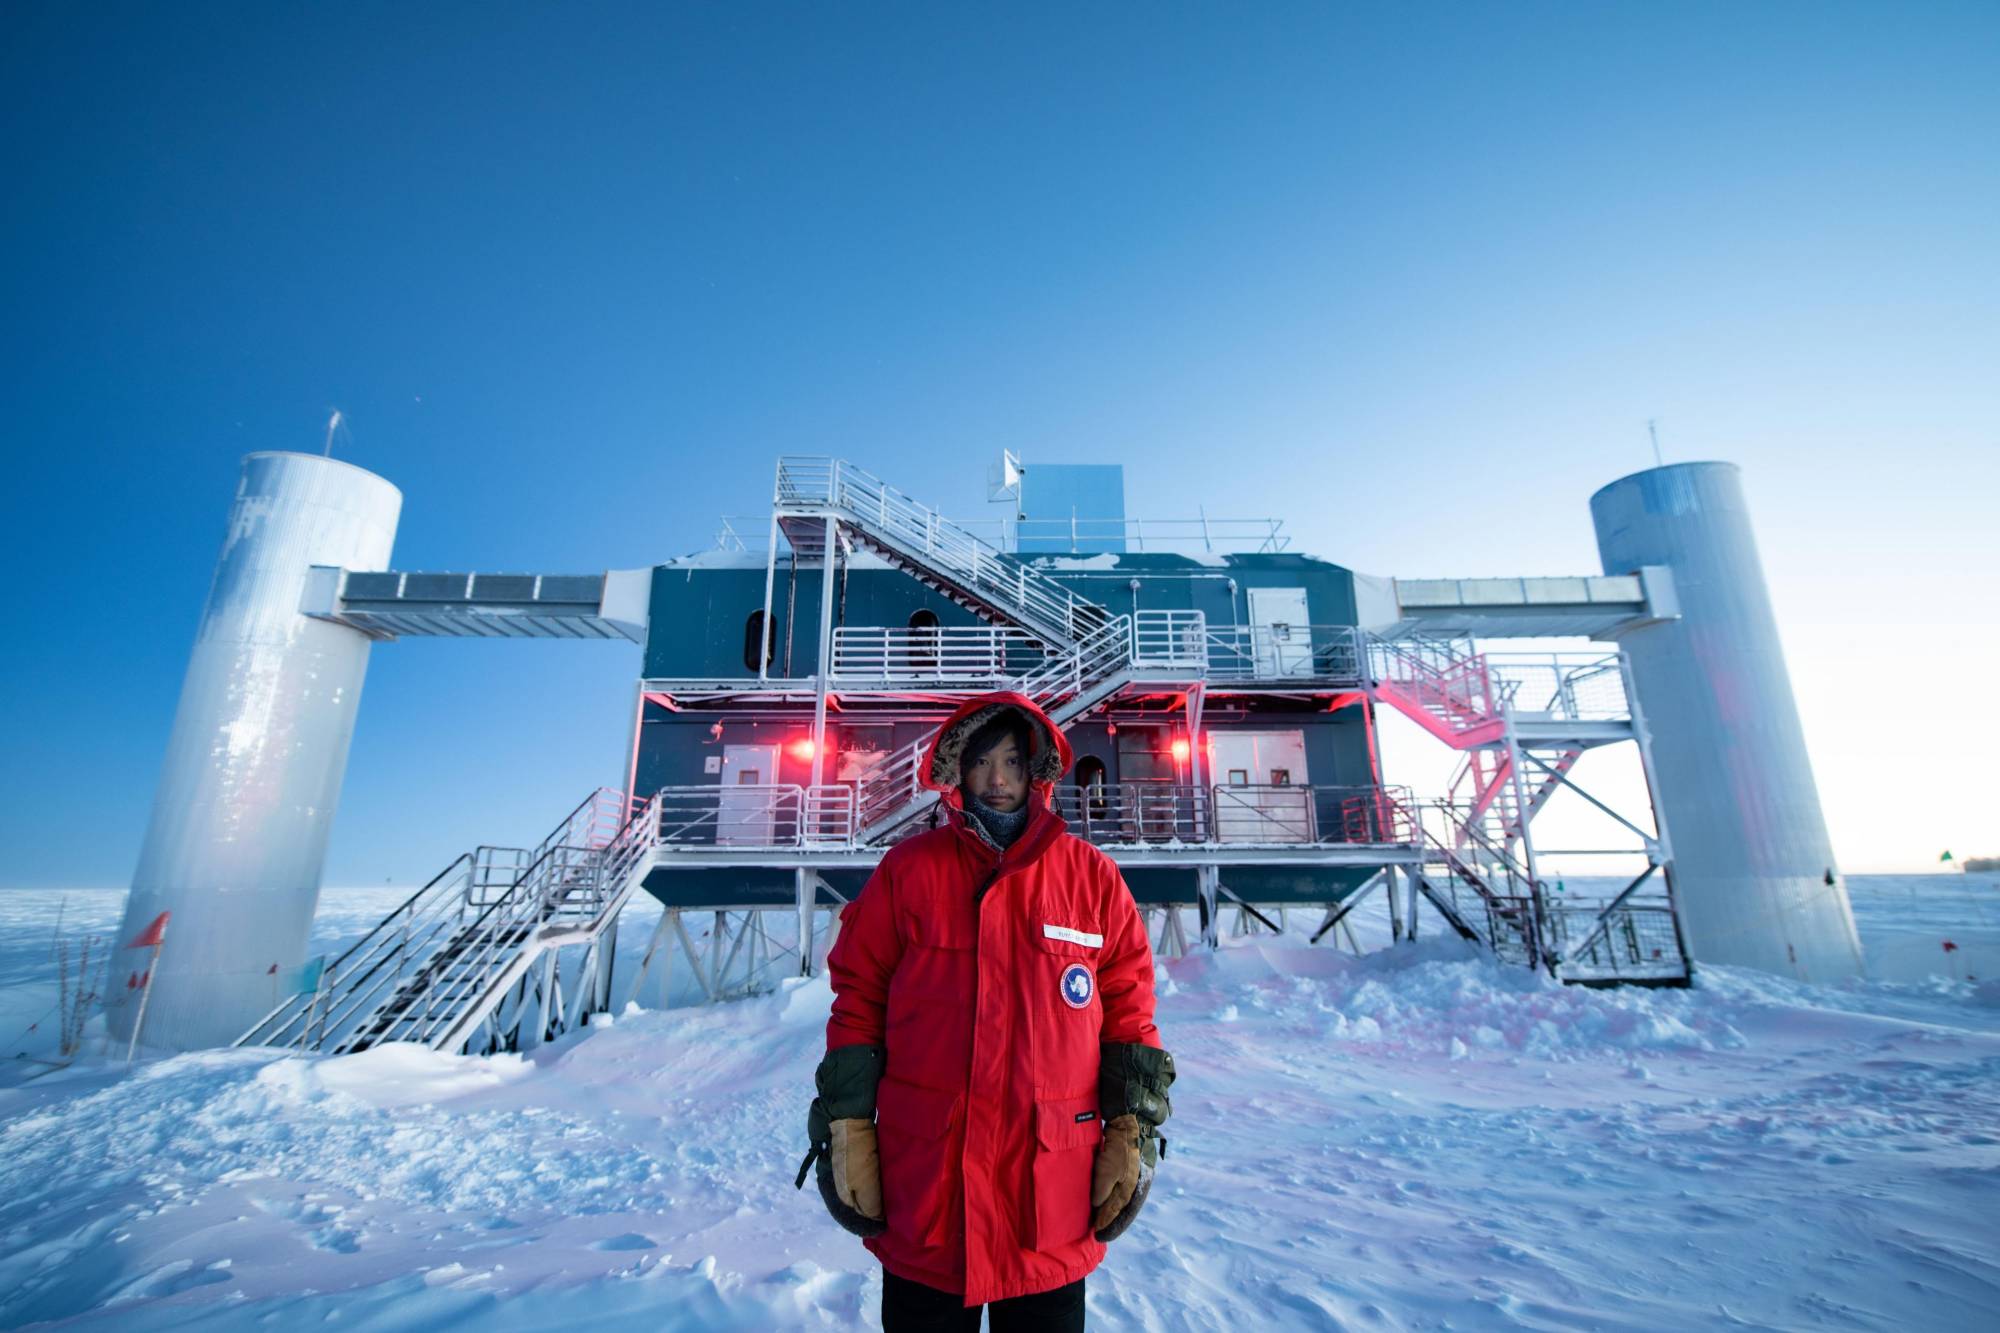 Yuya Makino is tasked with maintaining and monitoring the IceCube Laboratory, which collects data from below the Antarctic ice. | COURTESY OF YUYA MAKINO, ICECUBE / NSF / VIA KYODO